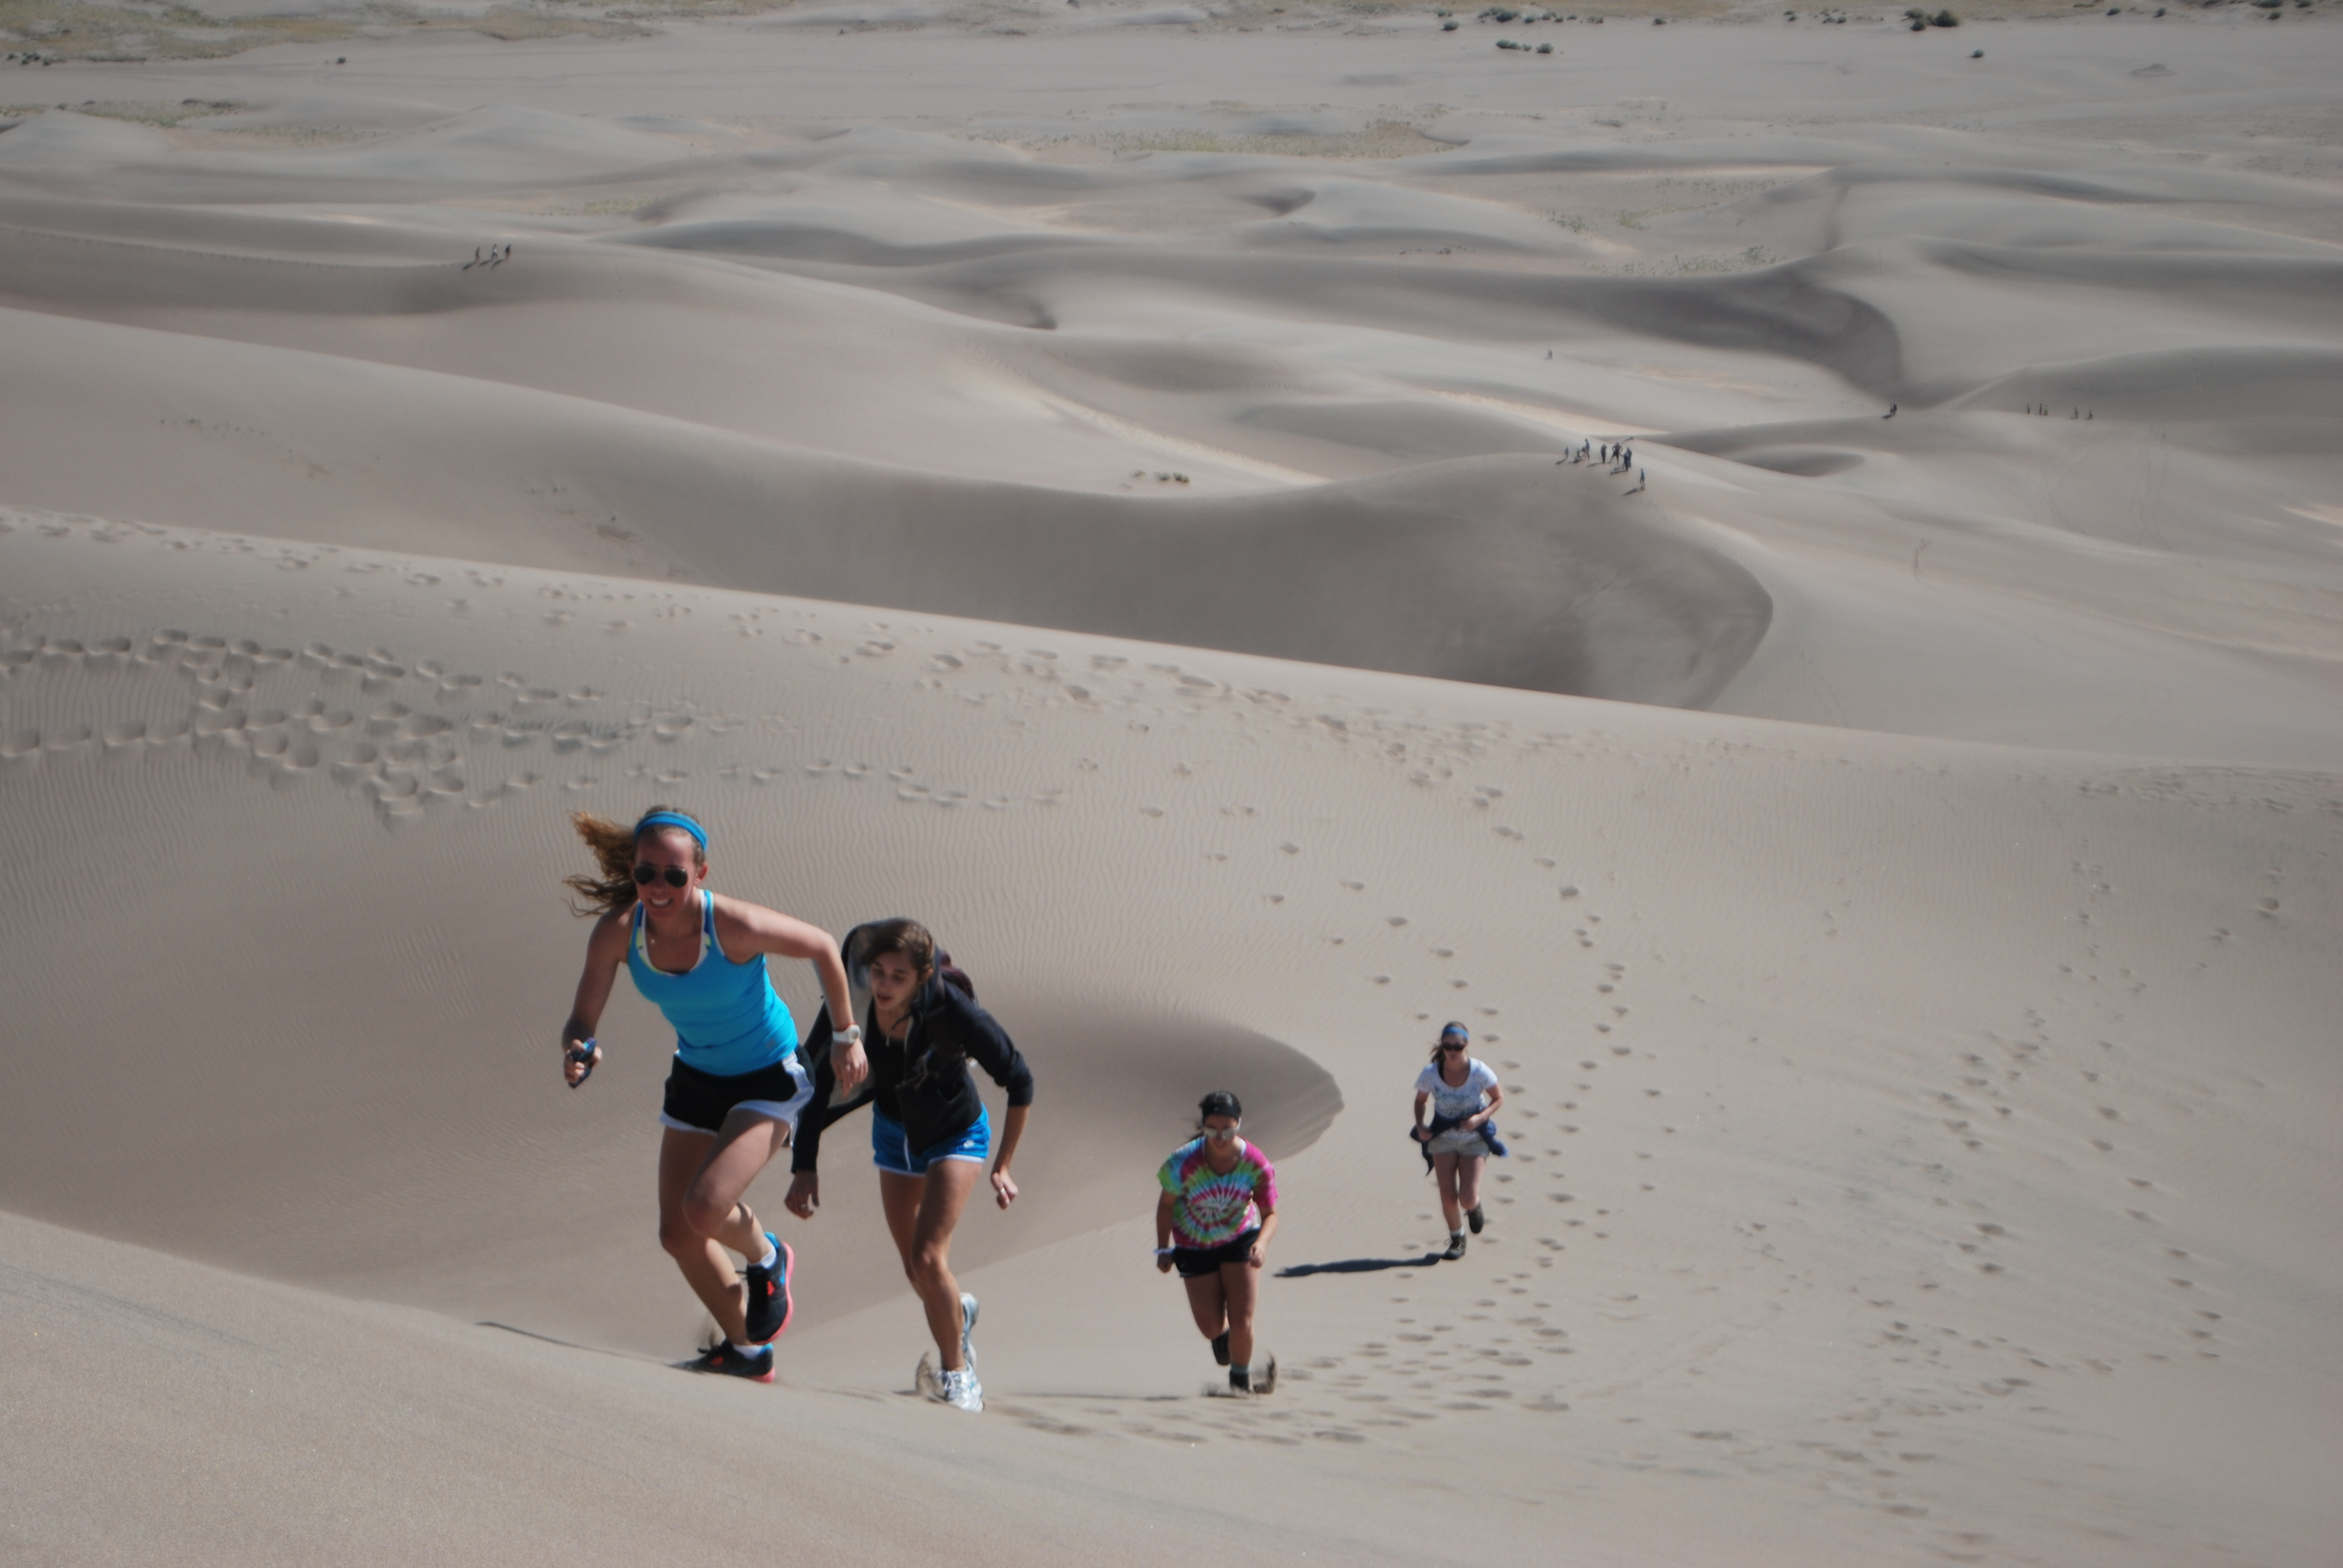 FYE students at Sand Dunes National Park. <span class="cc-gallery-credit"></span>